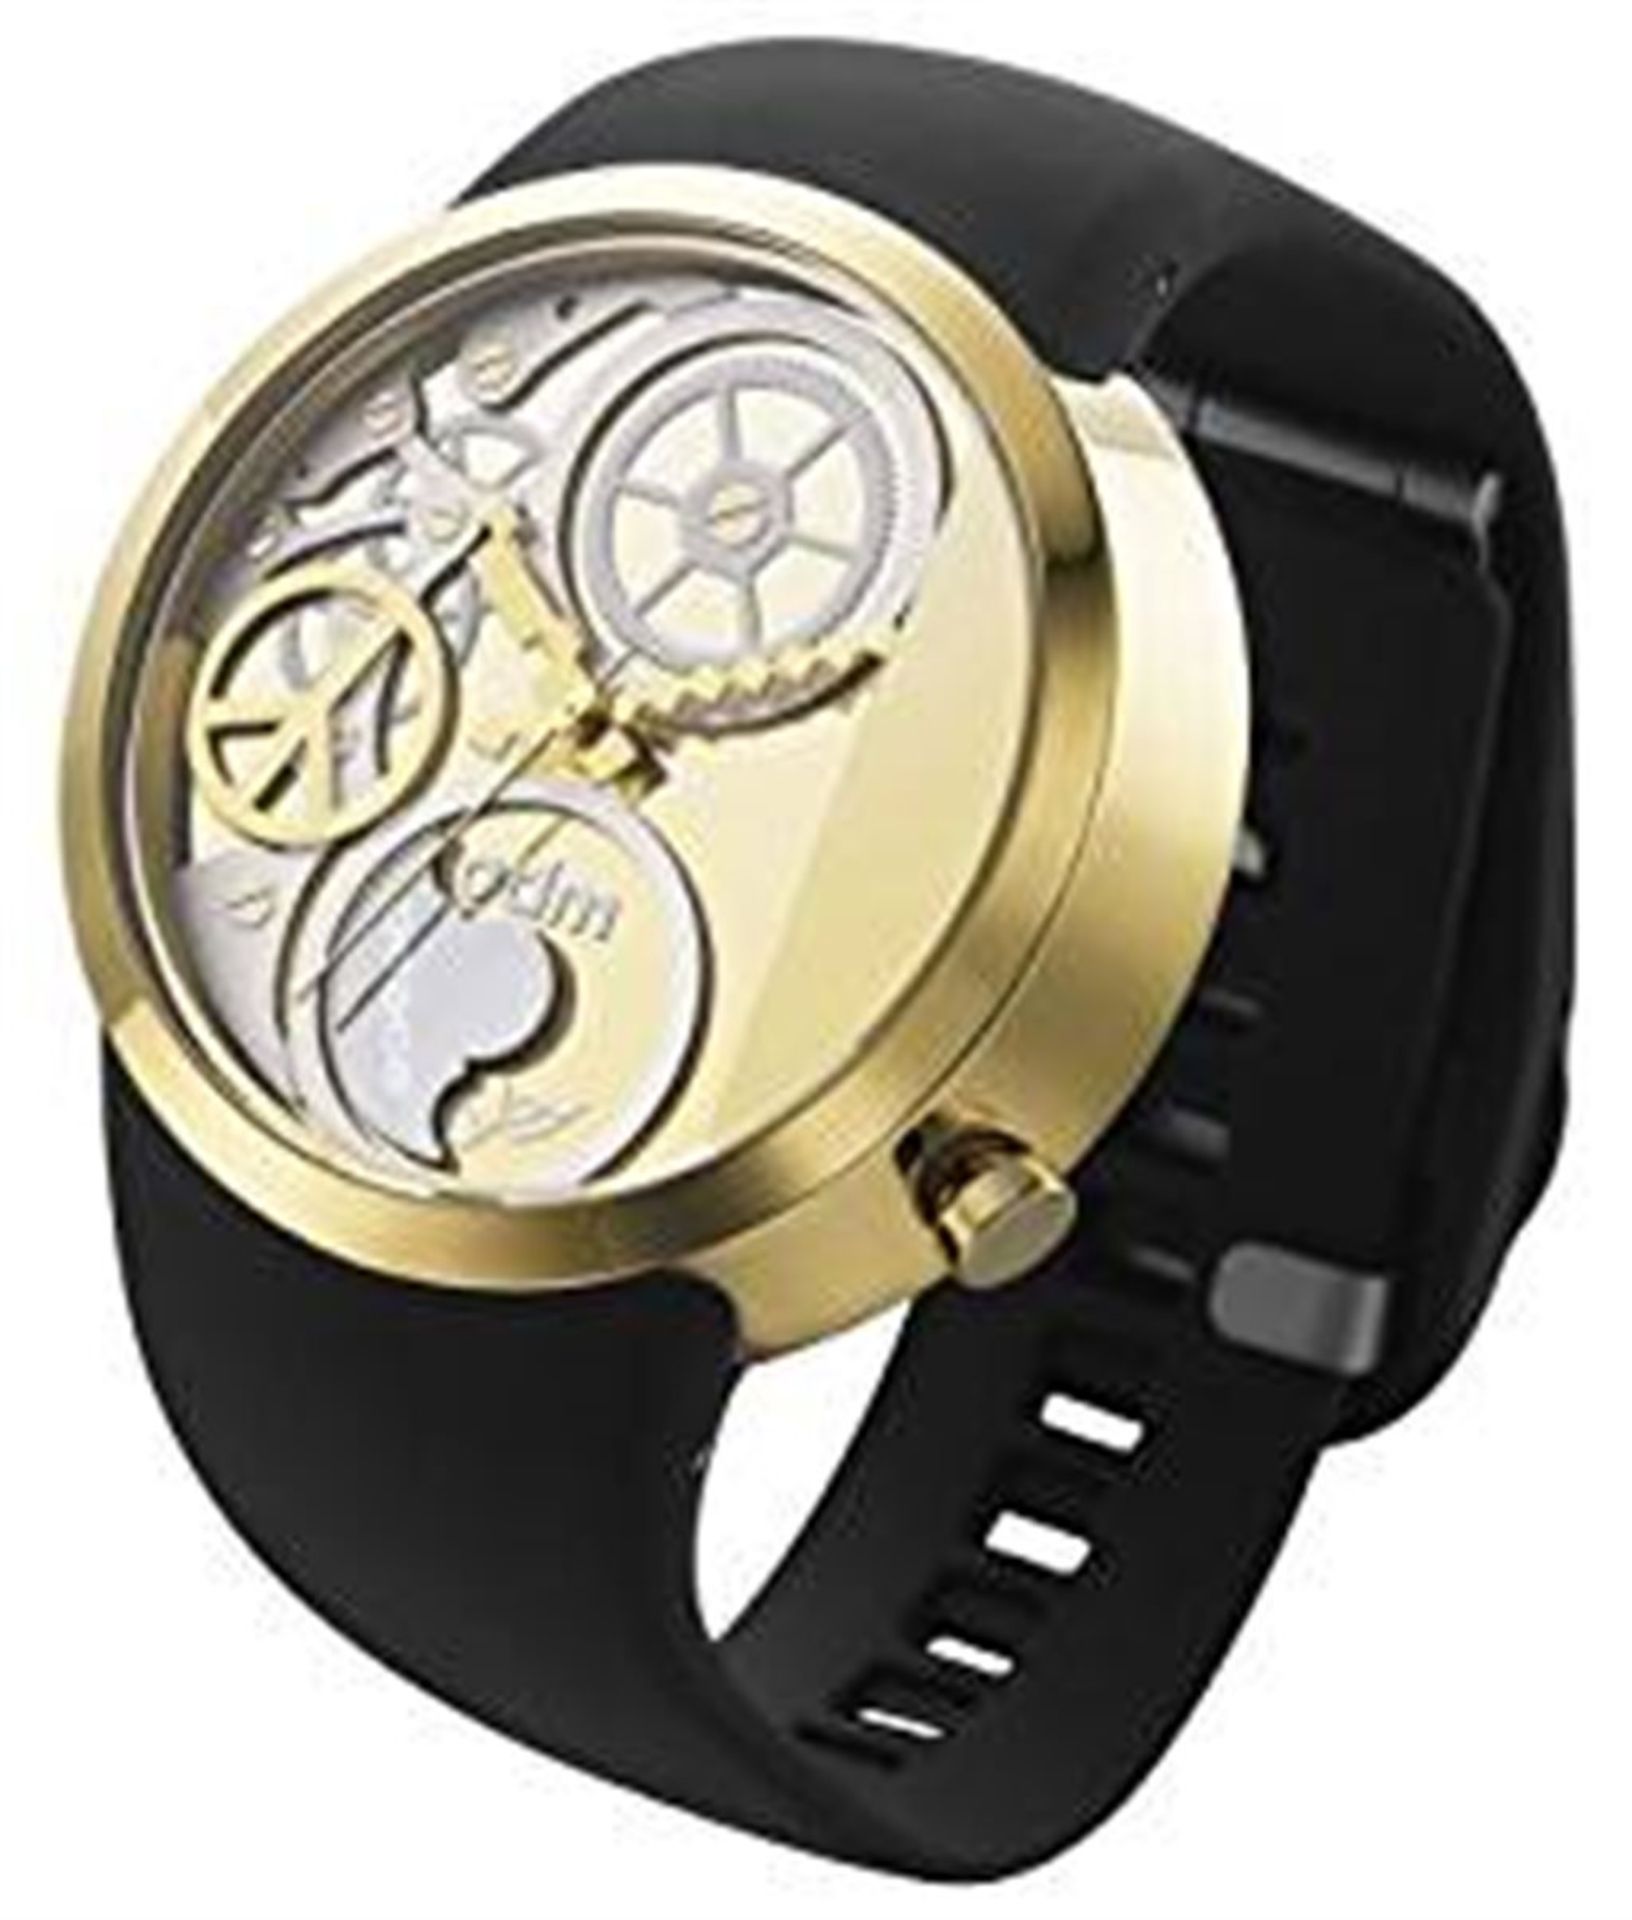 Box of 19 Discounted Watches from Lotus and more! Great Resell Potential! Details Inside - Image 9 of 19